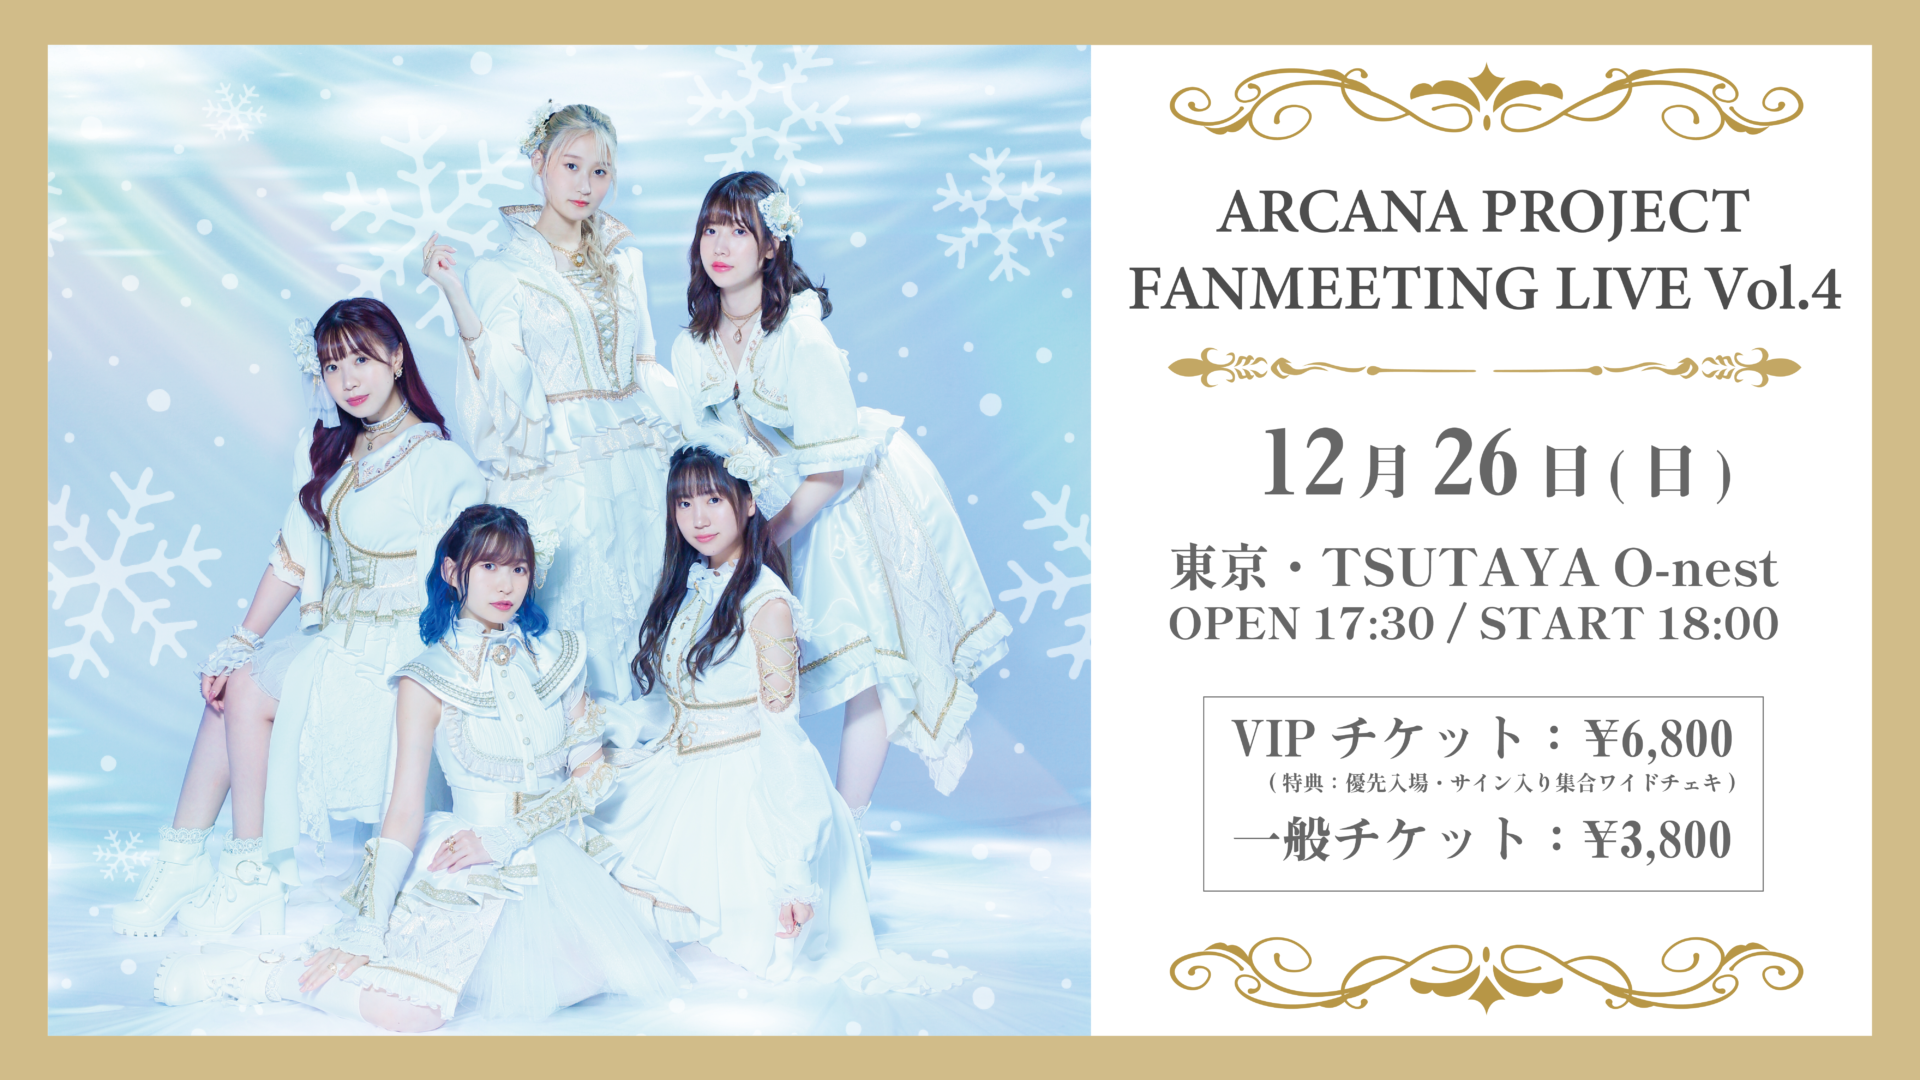 ARCANA PROJECT FANMEETING LIVE Vol.4